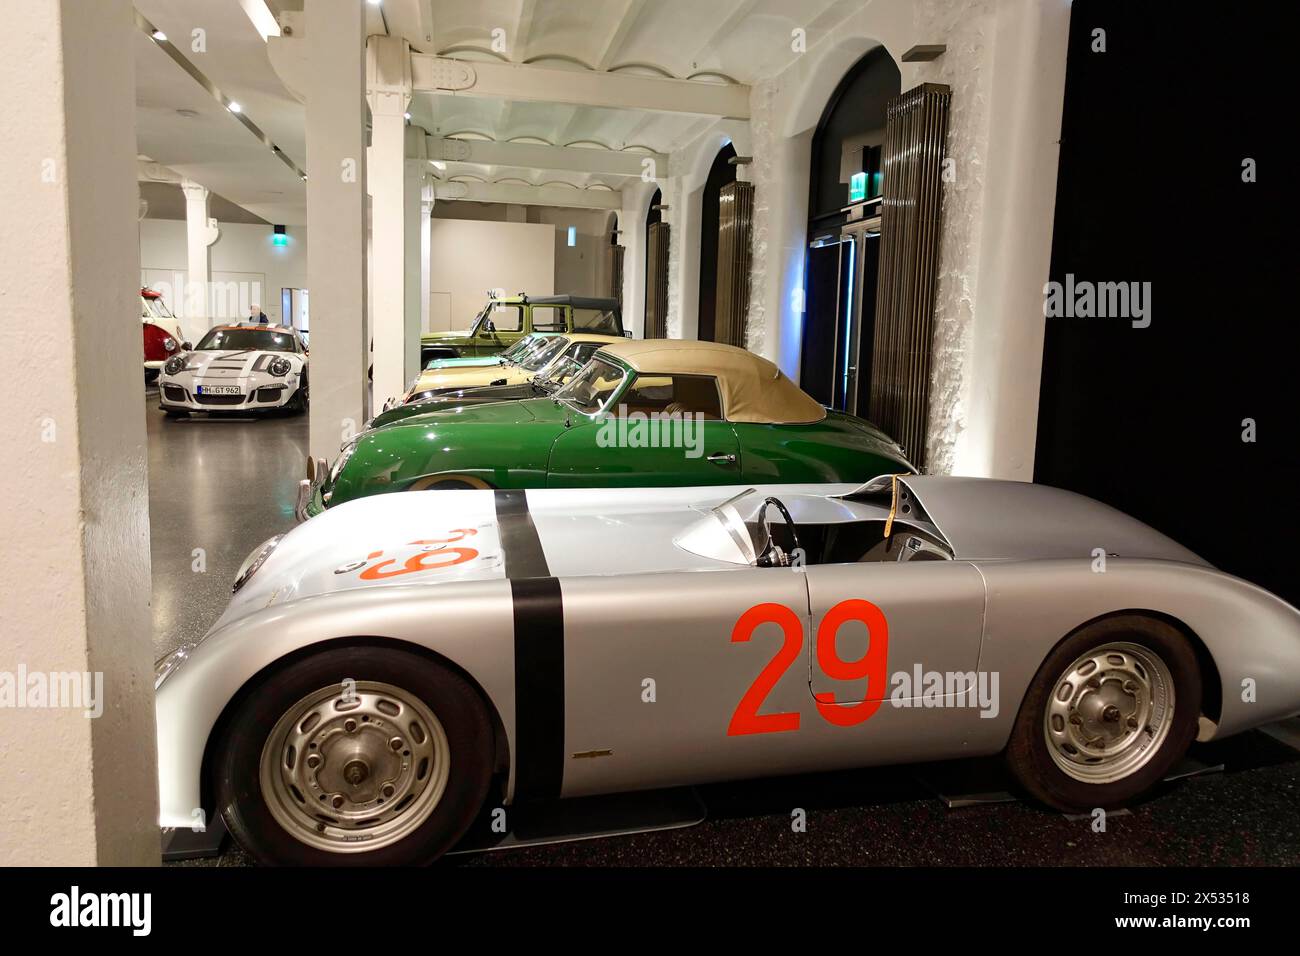 A silver Porsche racing car with starting number 29 is parked among other classic cars, AUTOMUSEUM PROTOTYP, Hamburg, Hanseatic City of Hamburg Stock Photo